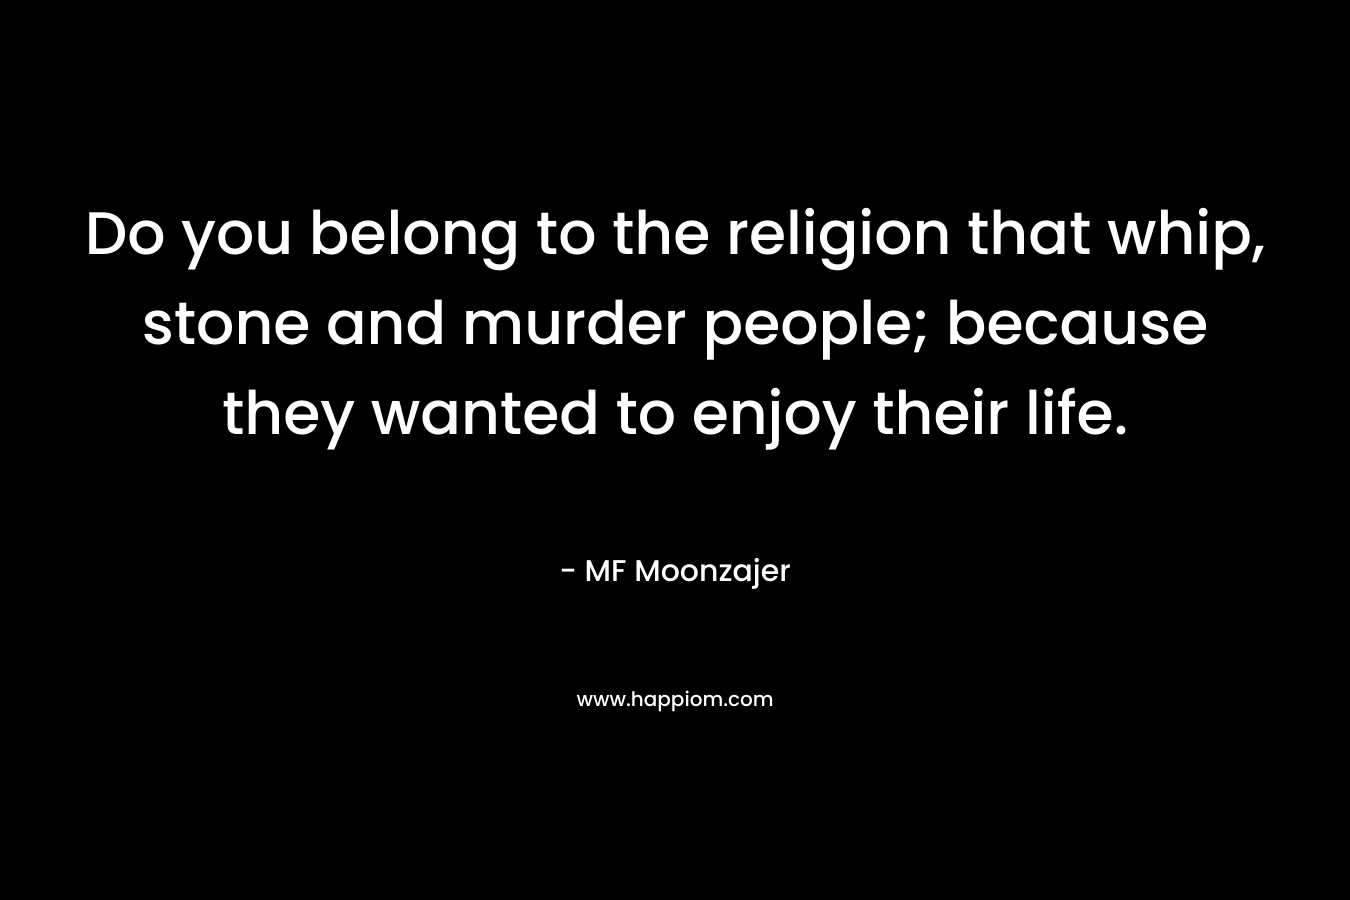 Do you belong to the religion that whip, stone and murder people; because they wanted to enjoy their life. – MF Moonzajer